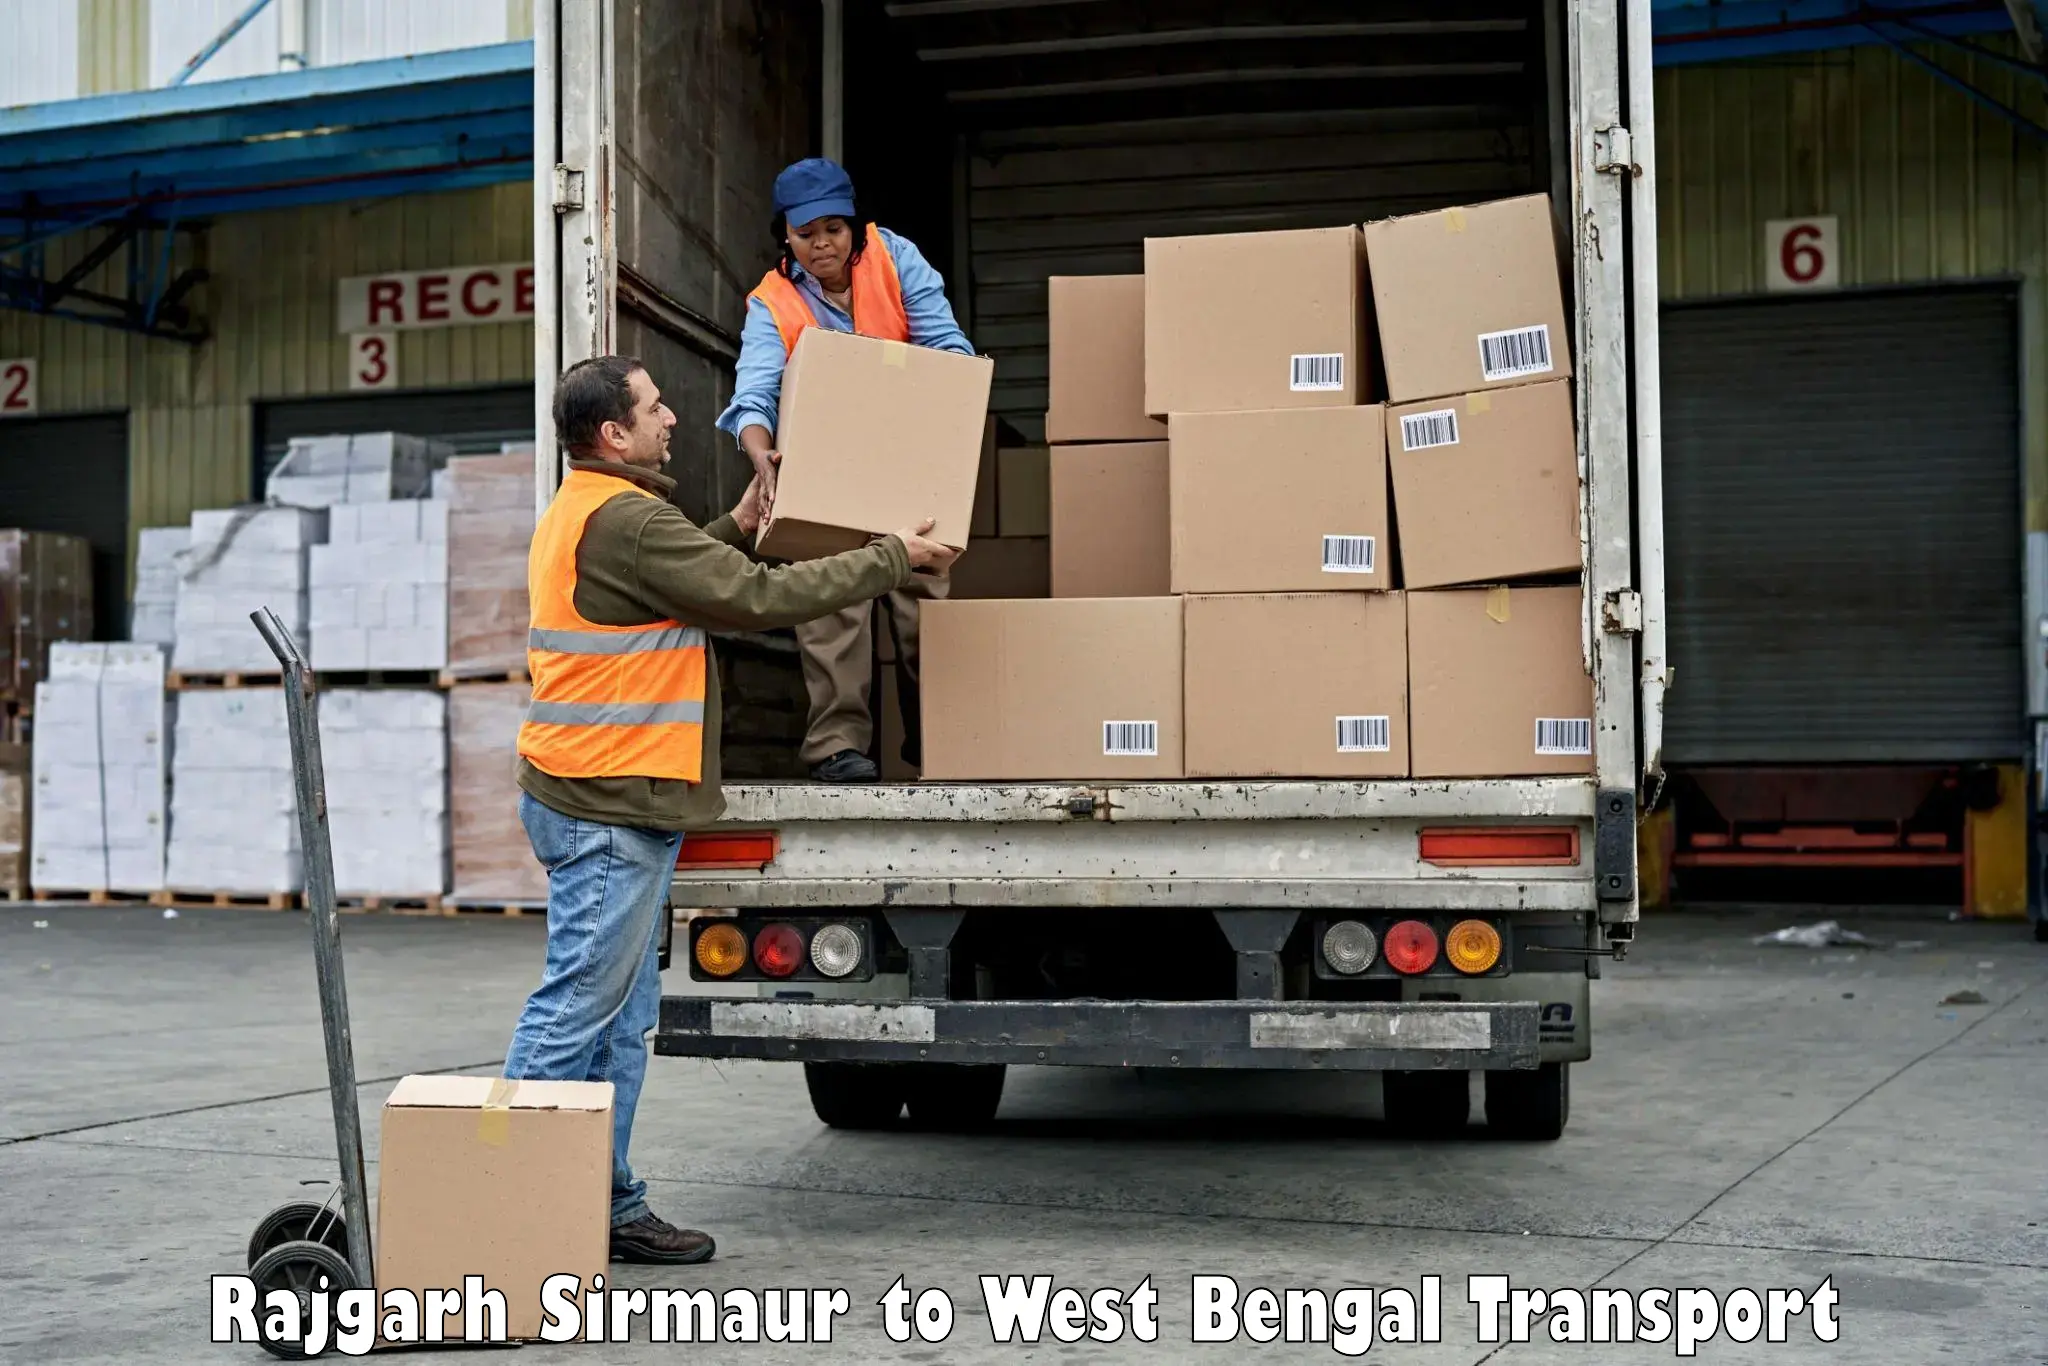 Road transport online services Rajgarh Sirmaur to Barrackpore